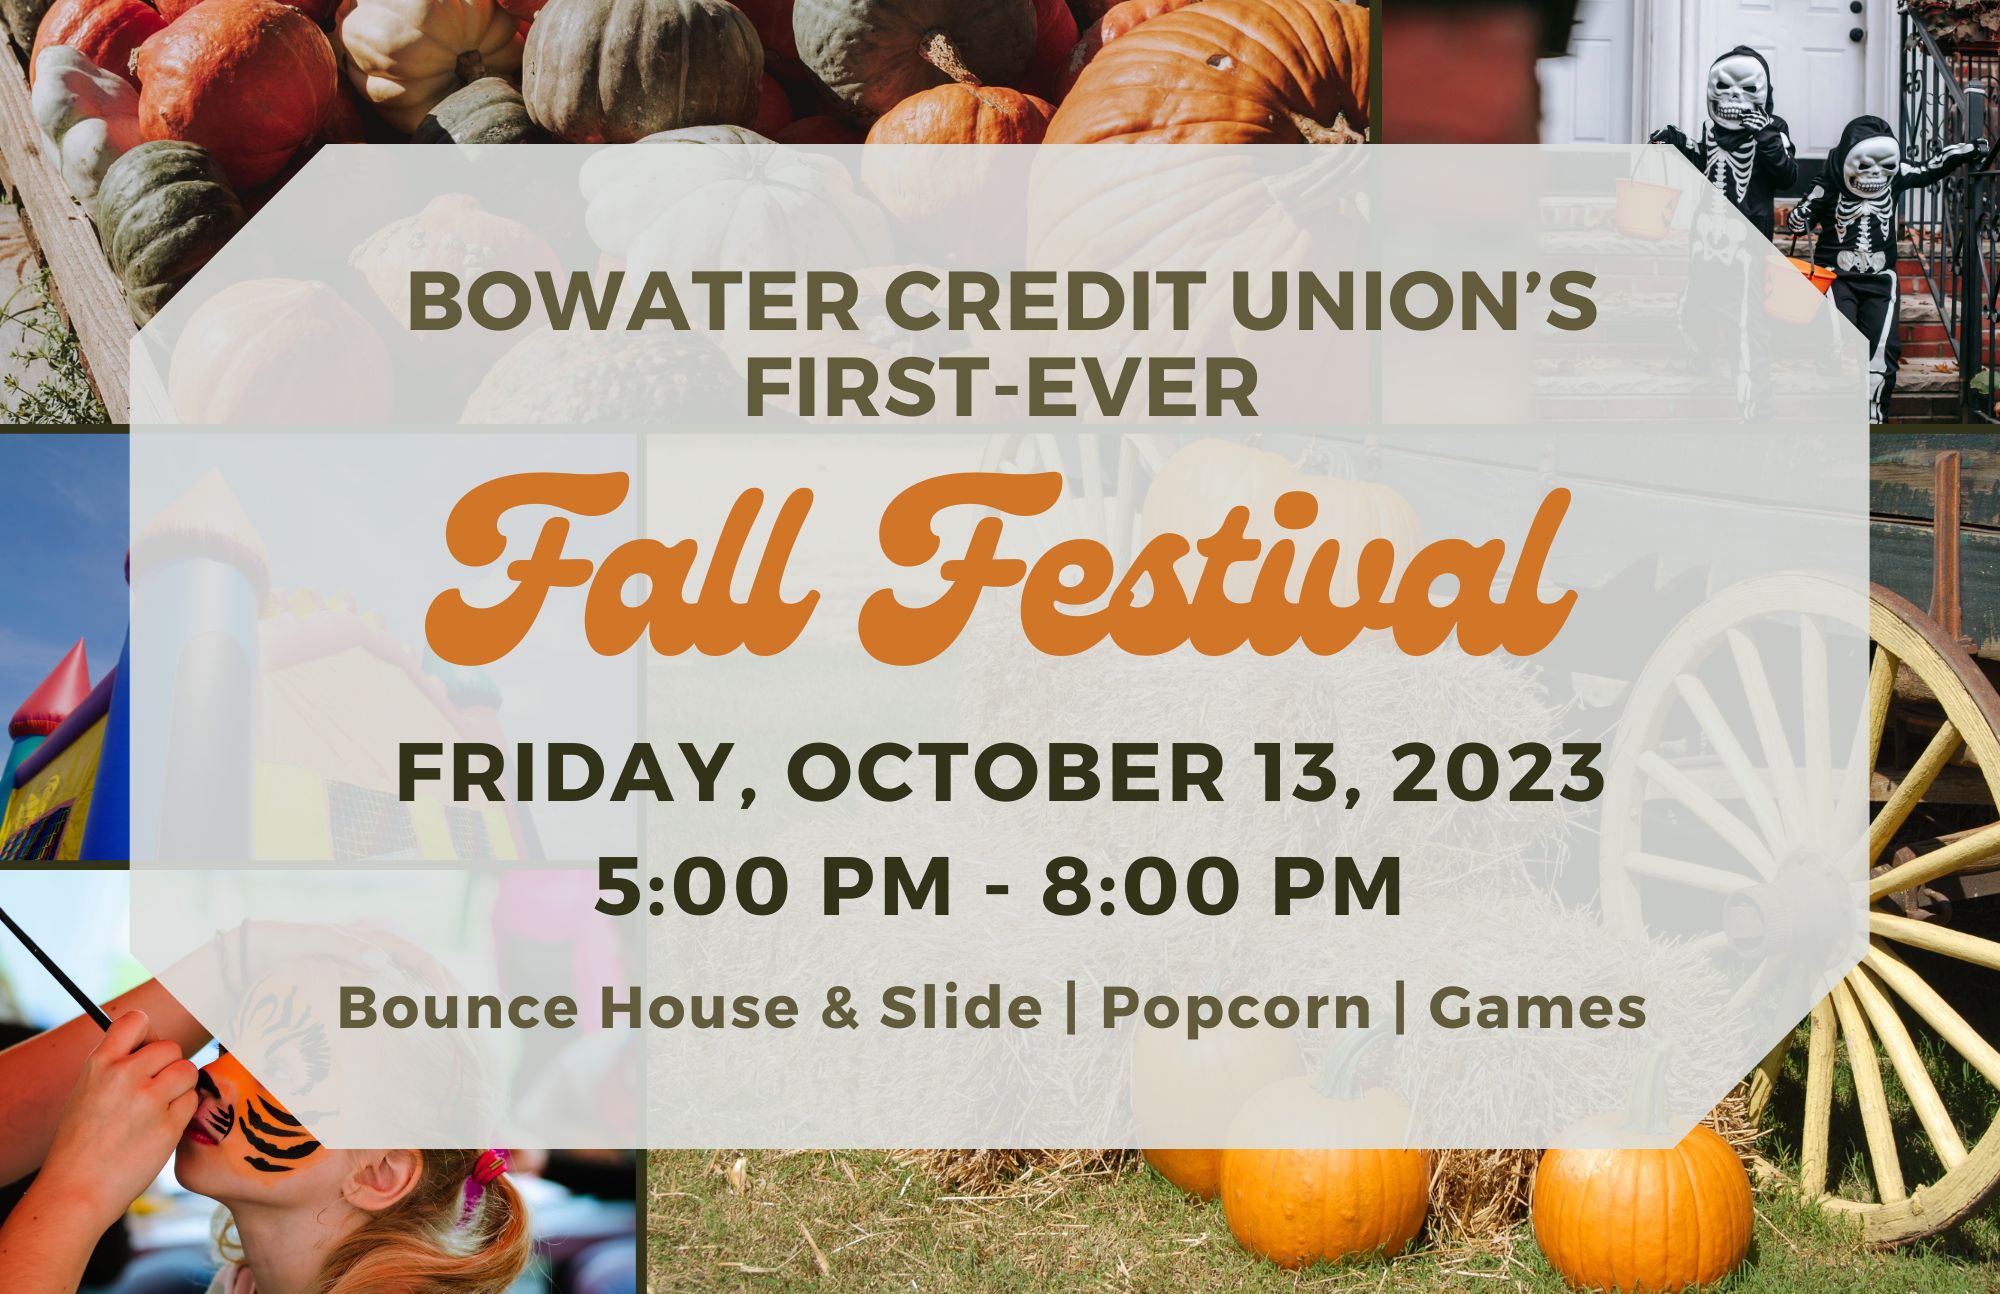 Information for Bowater's Fall Festival